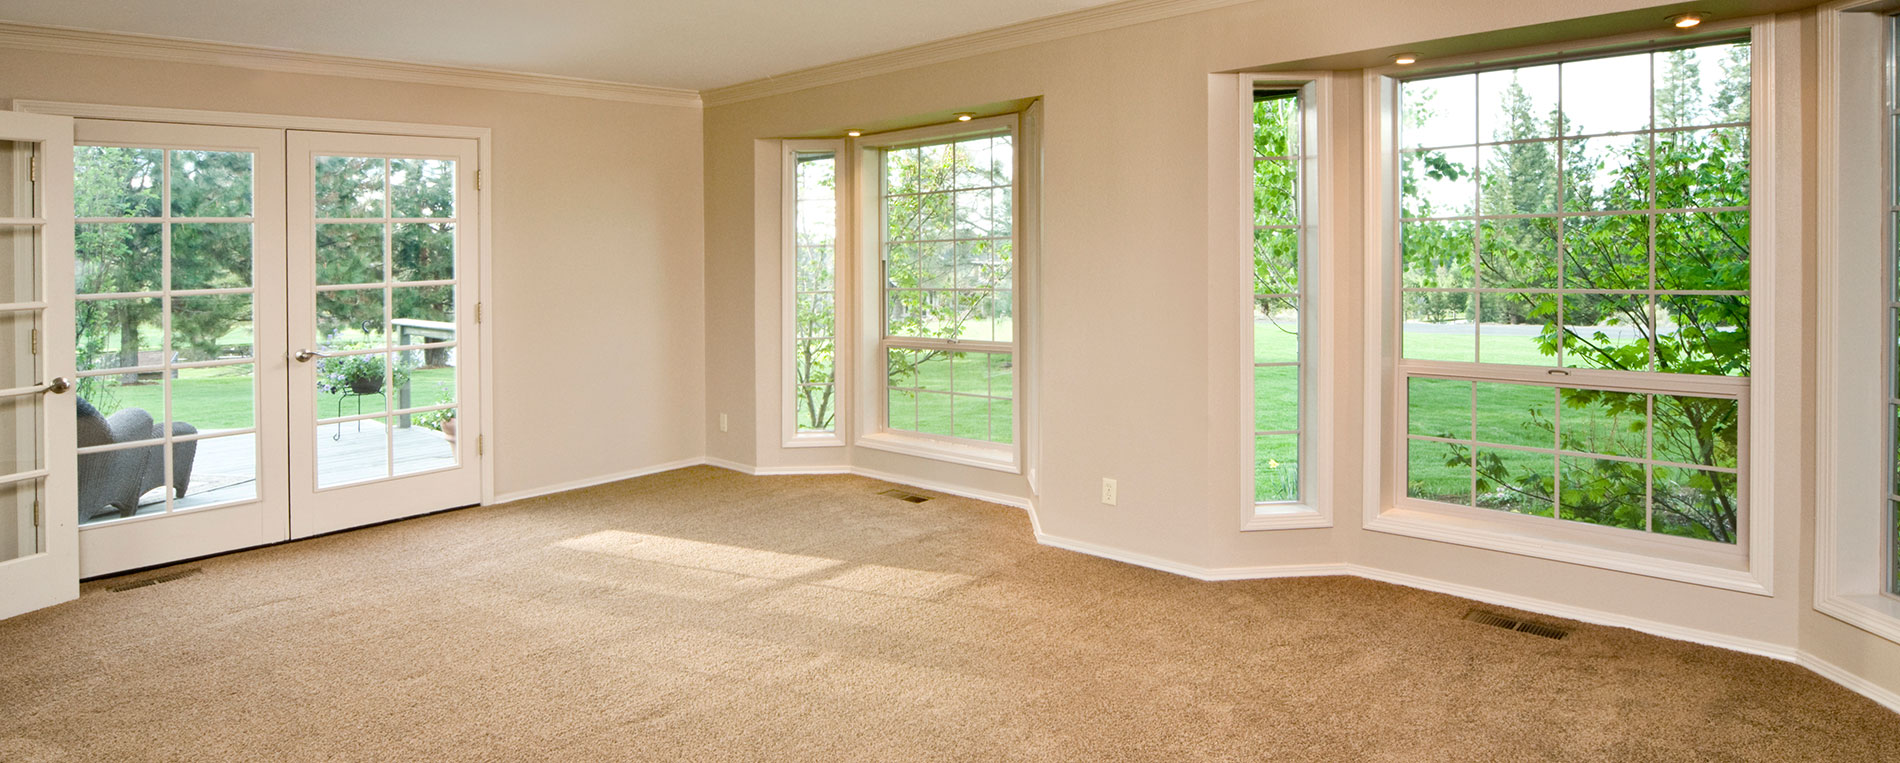 Useful Tips before Buying Carpets